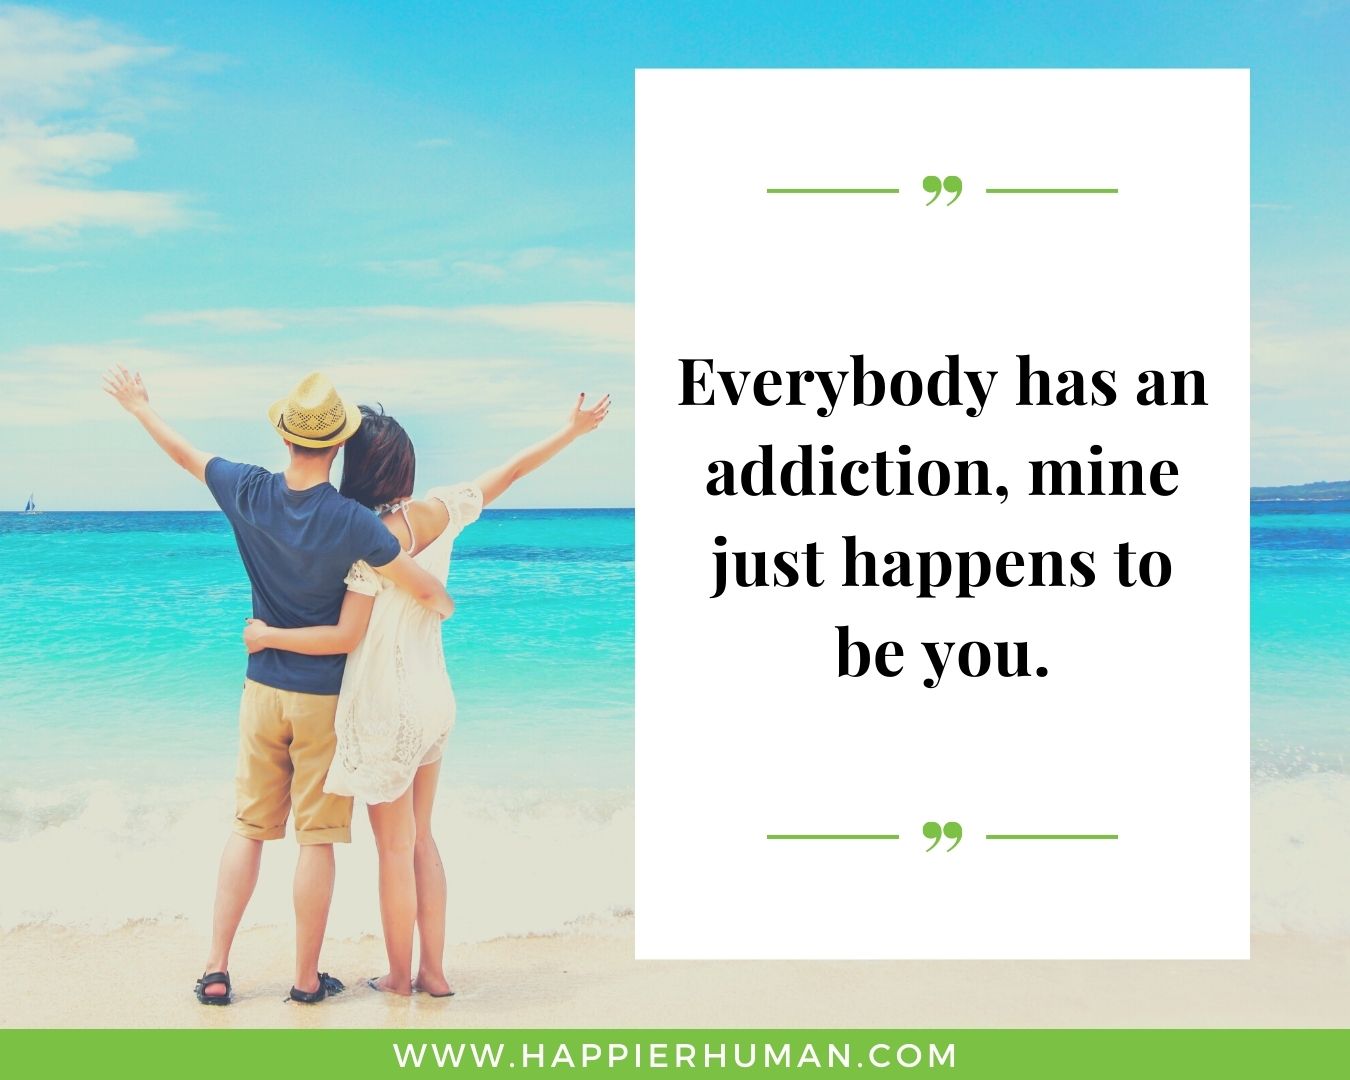 Funny Love Quotes for Her - “Everybody has an addiction, mine just happens to be you.”